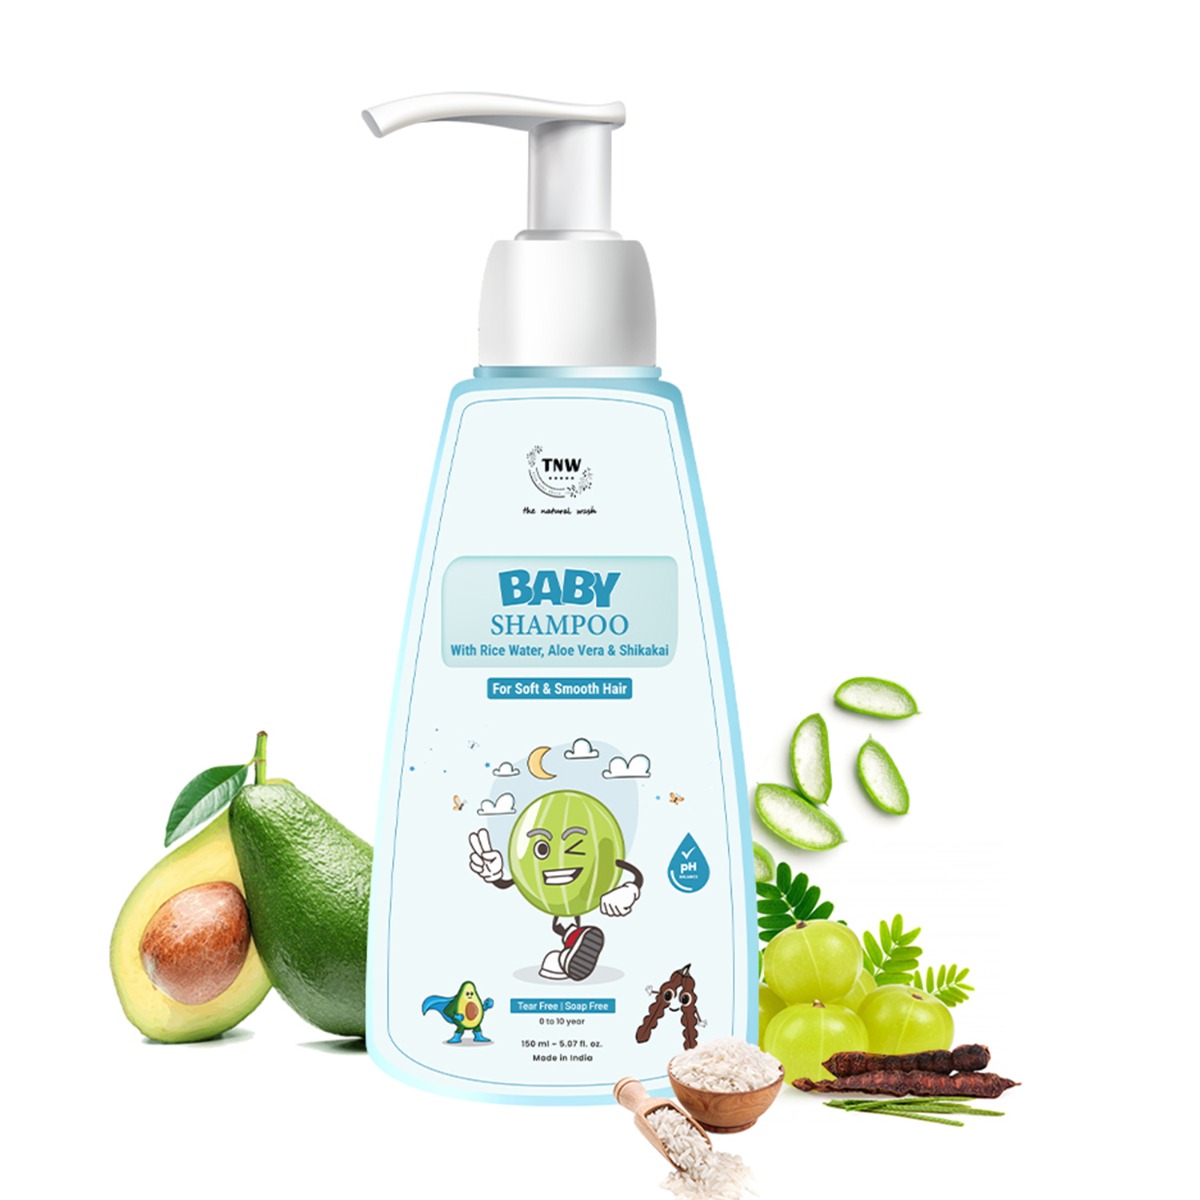 TNW - The Natural Wash Nourishing Baby Shampoo For Soft & Smooth Hair, 150ml